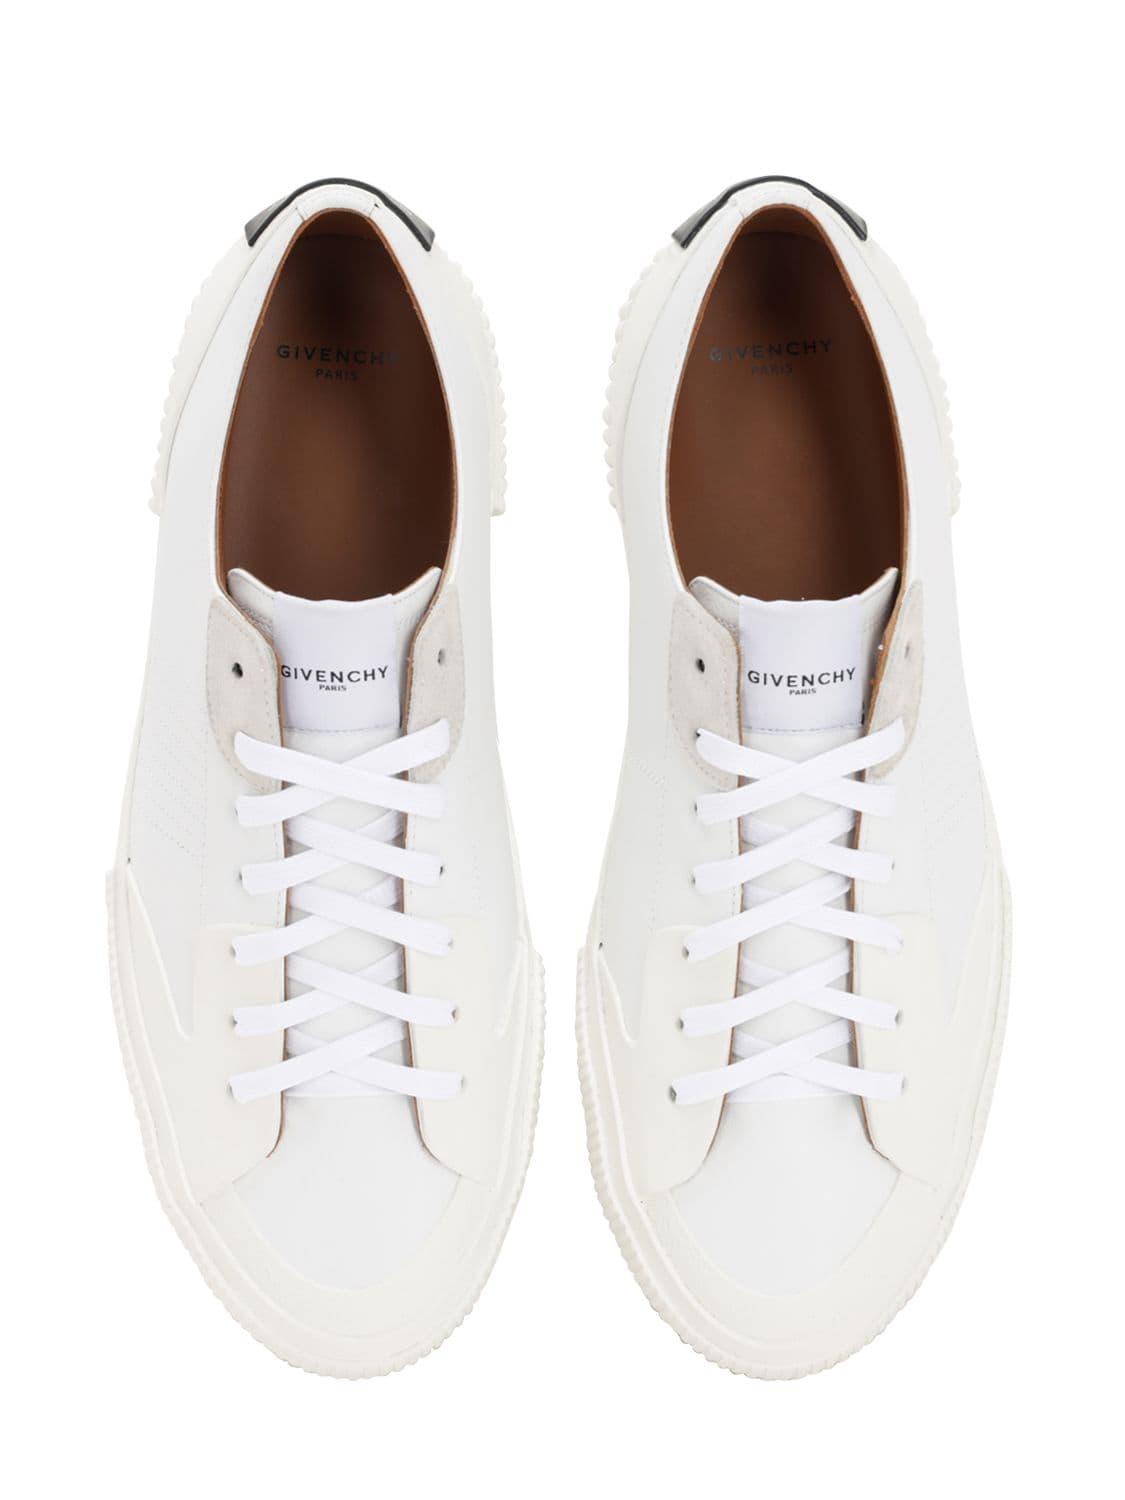 Givenchy Light Leather Tennis Sneakers in White for Men - Lyst